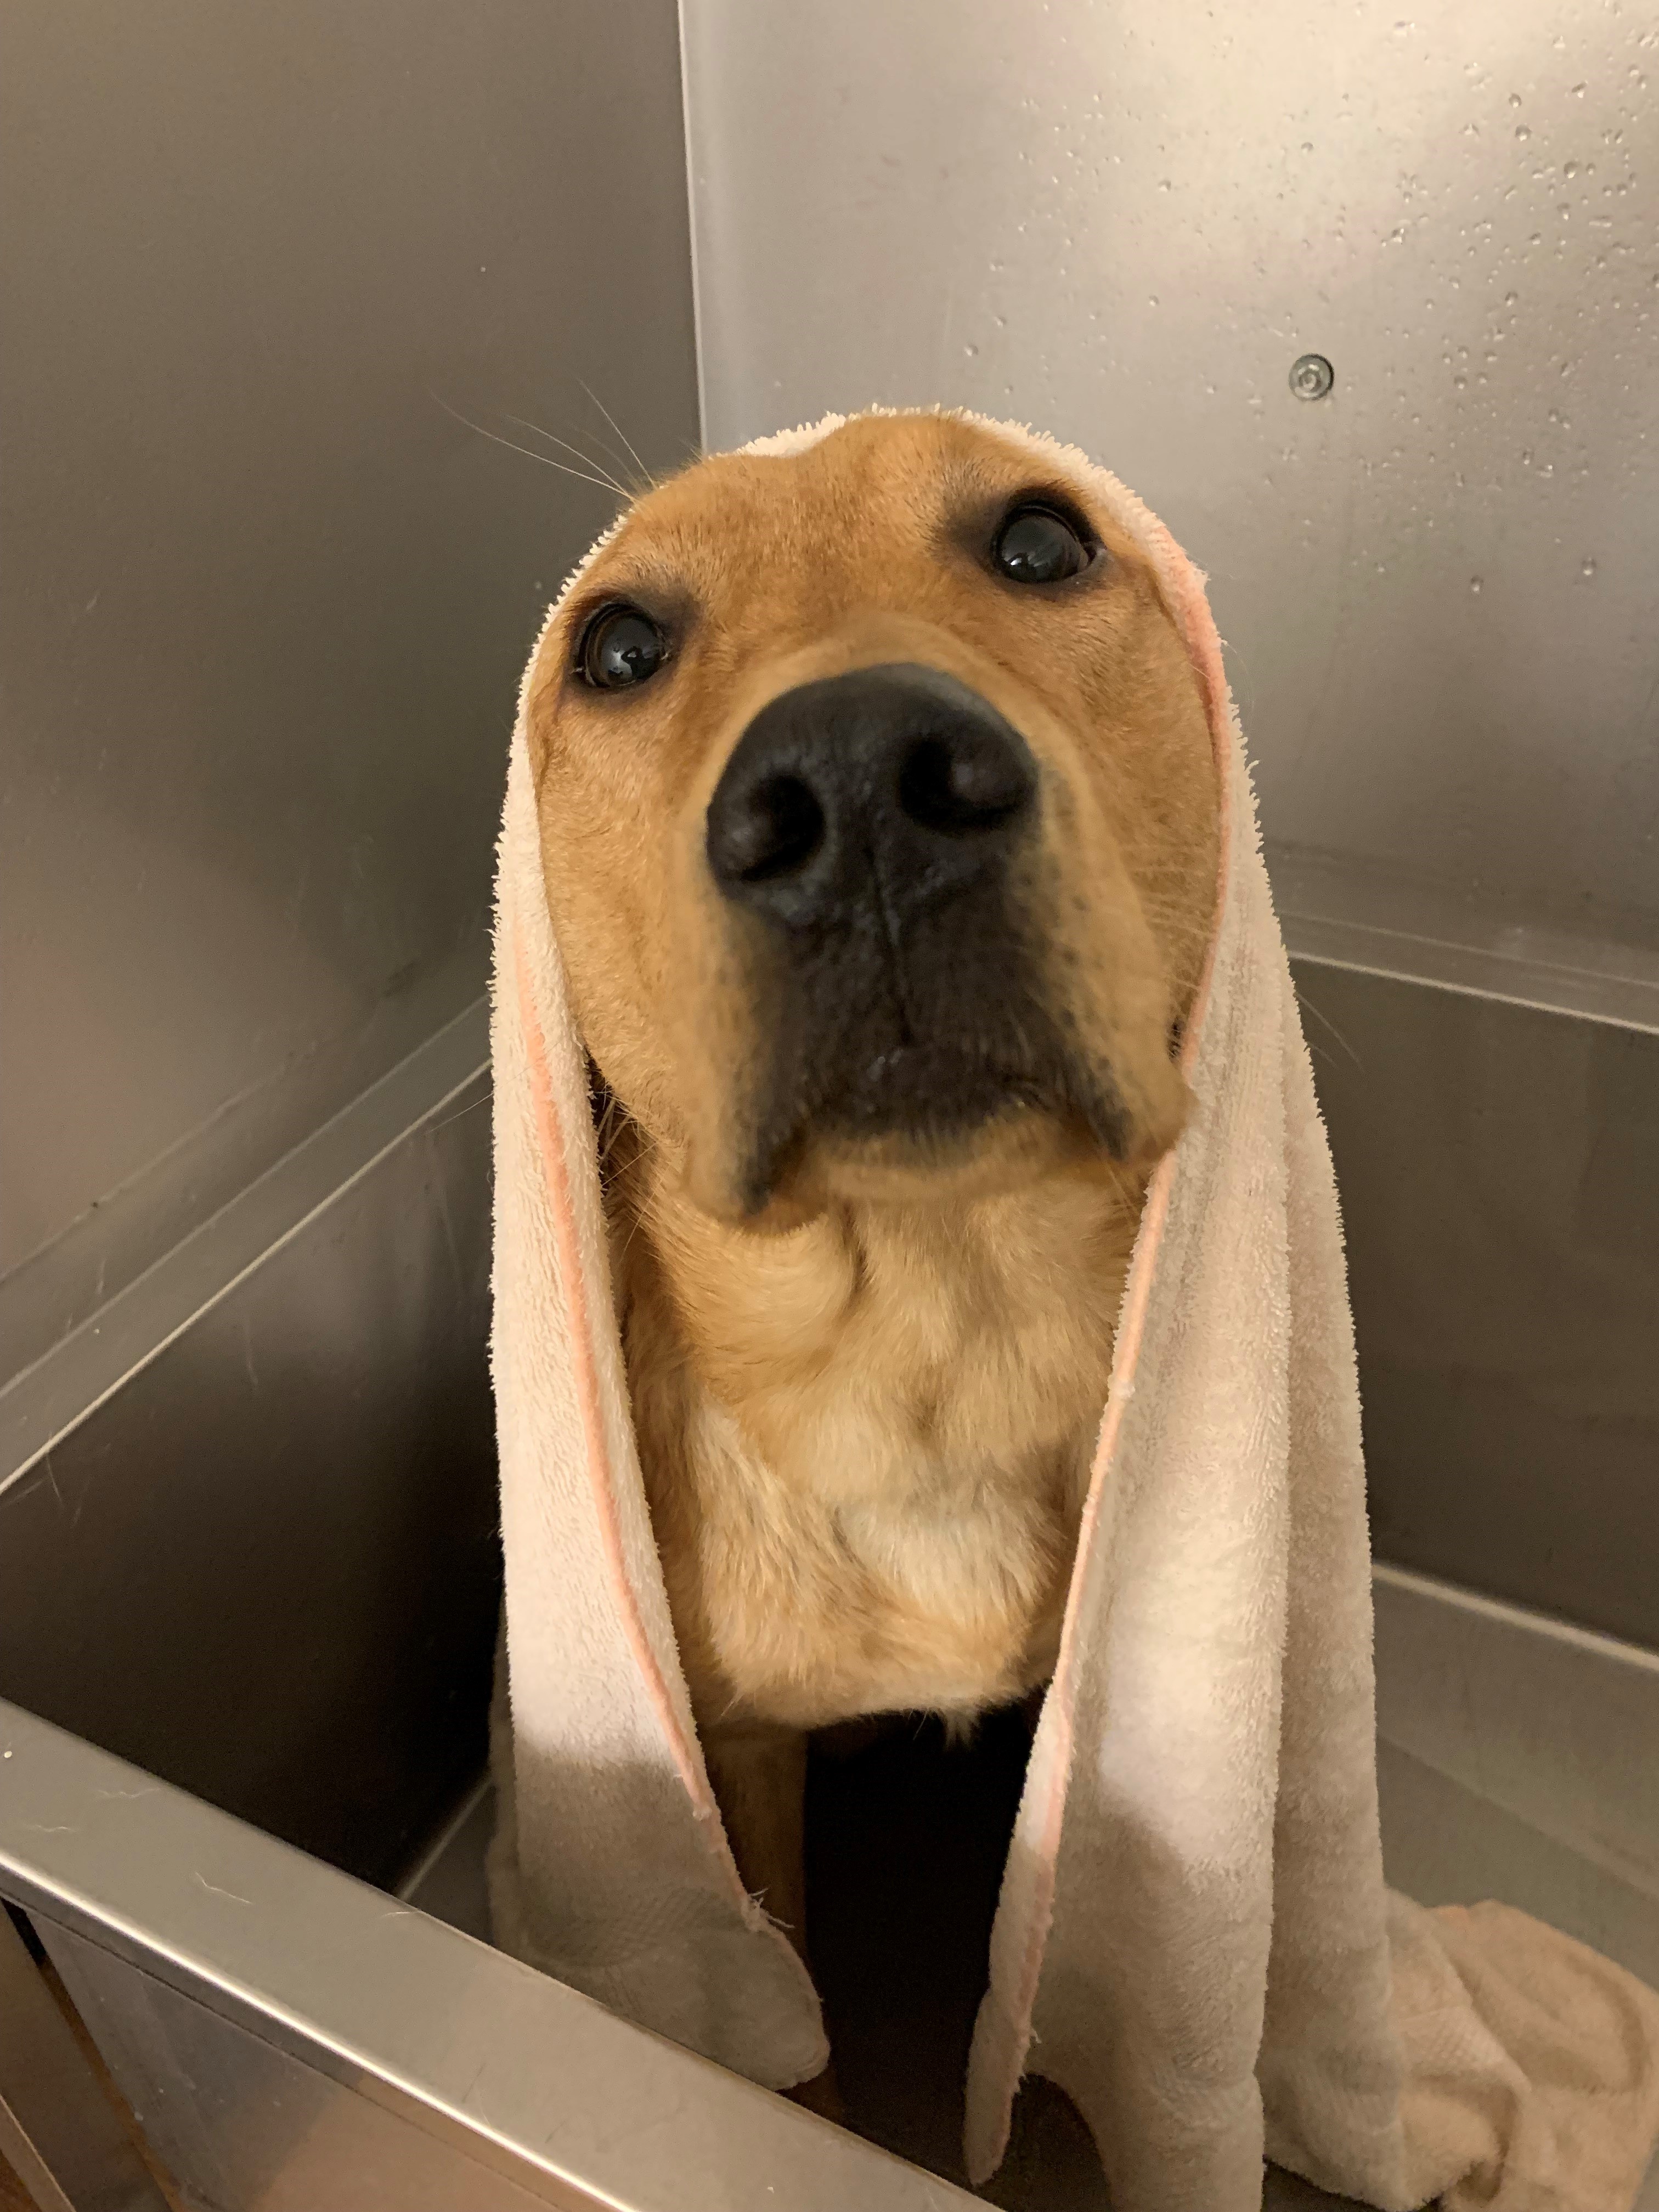 Robbie, a male yellow Labrador retriever, in a metal bathtub with a towel over his head.